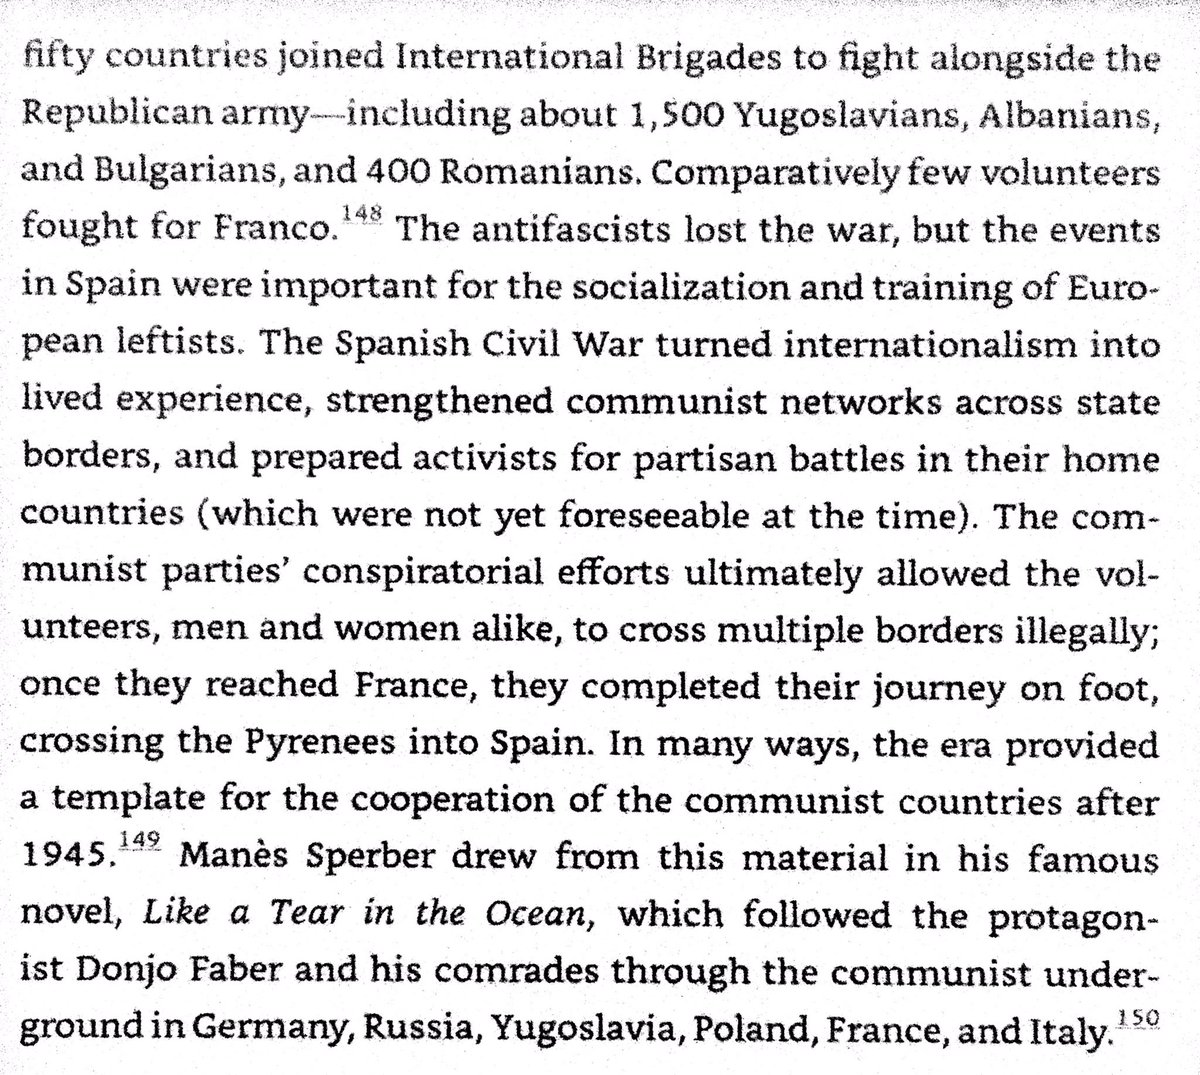 Support for a Balkans Federation among leftists. International Brigades veterans from Spanish Civil War strengthened global communist ties & formed cadres for the communist parties.